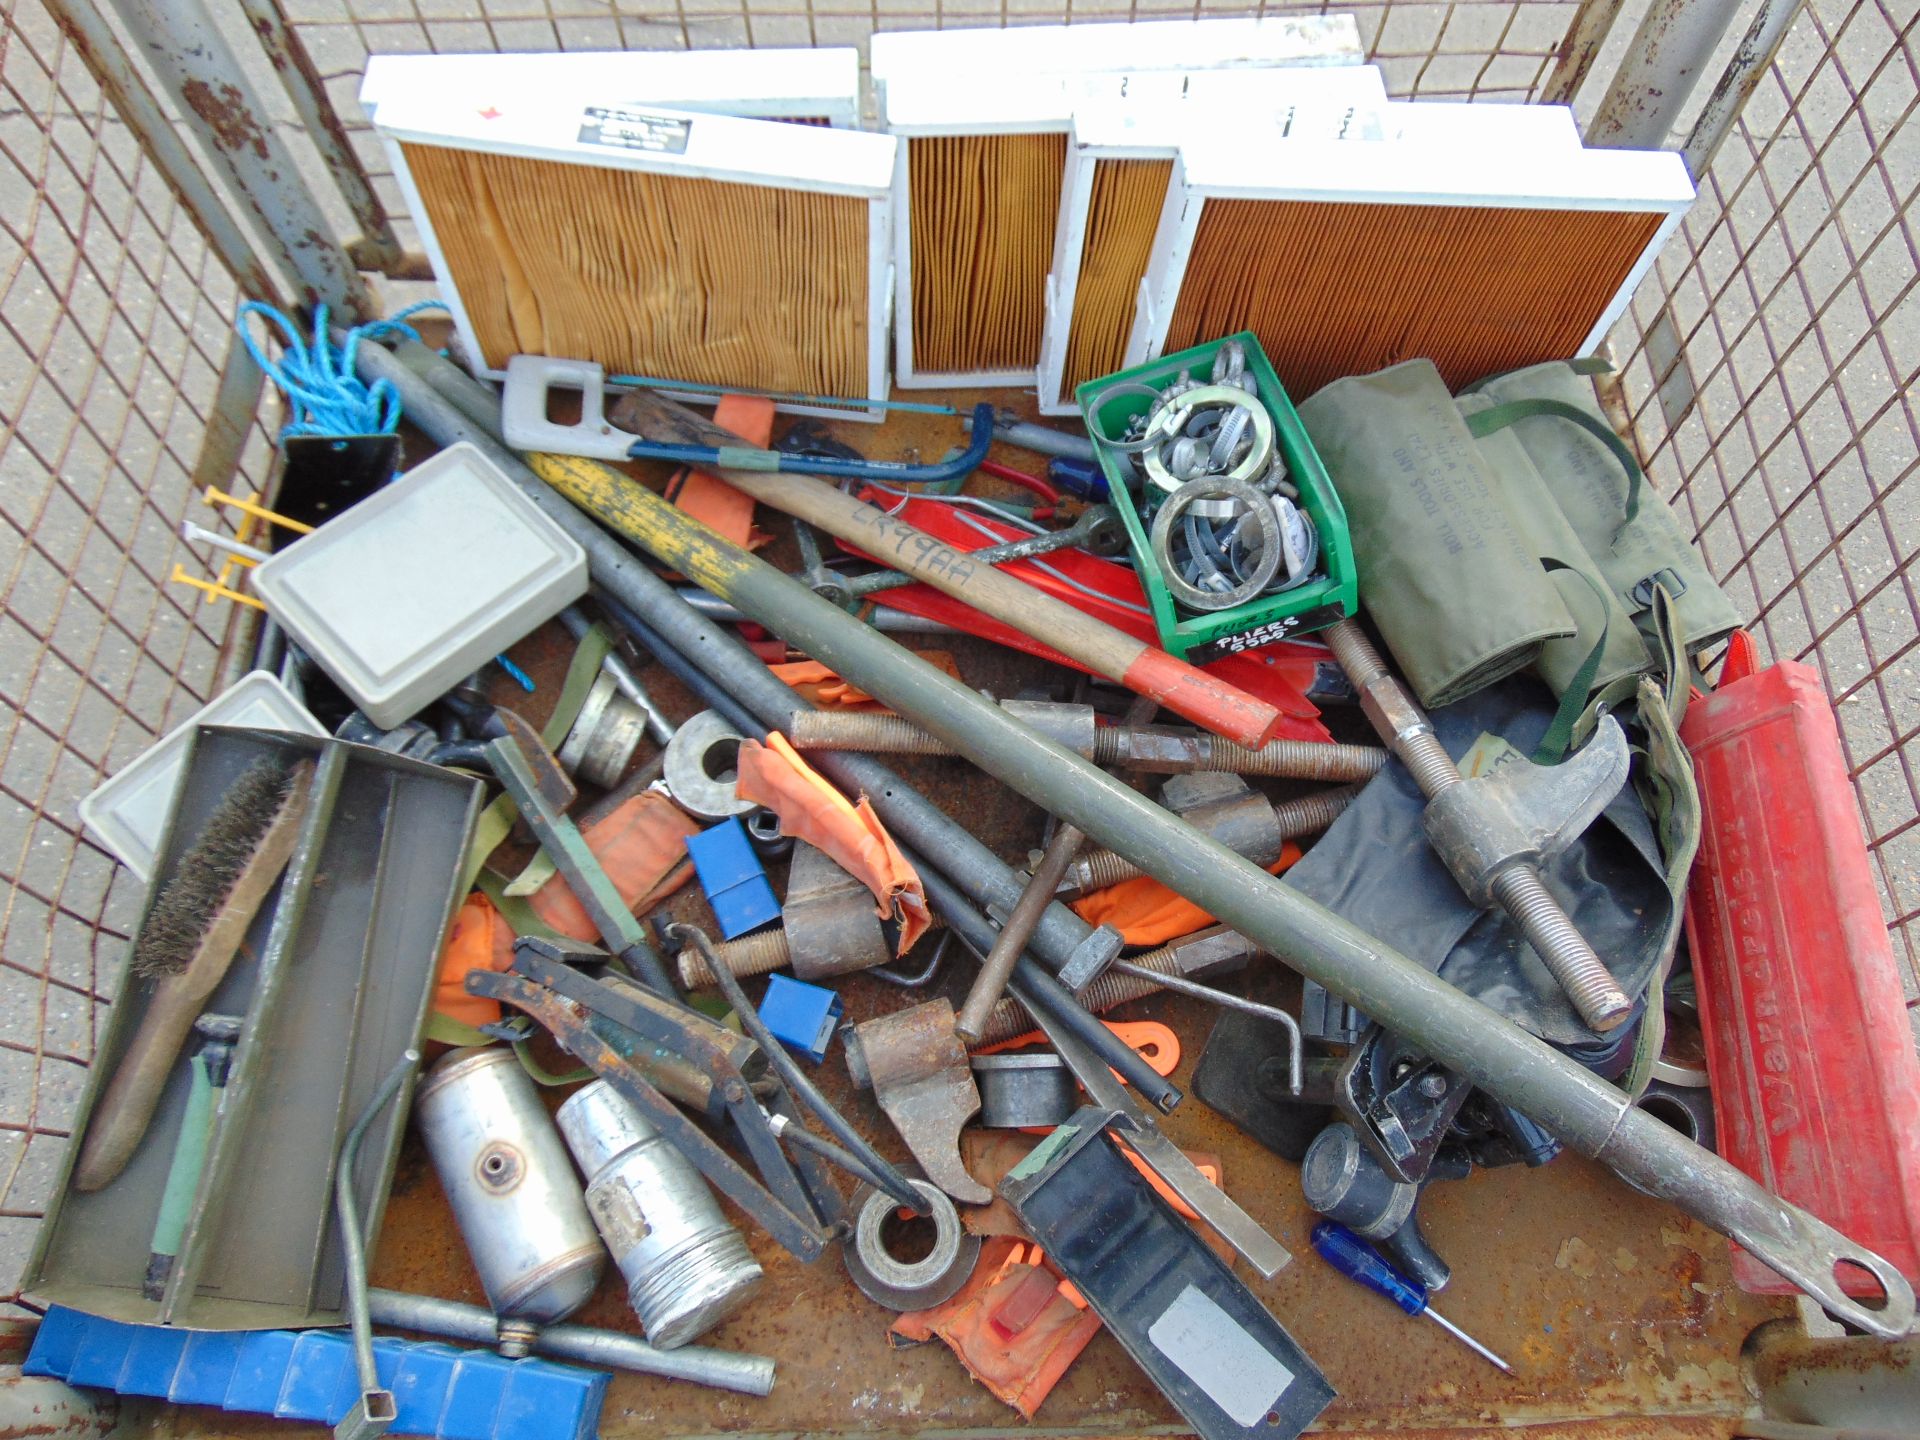 Mixed Stillage of Tool Rolls, Clamps, Foot Pump etc